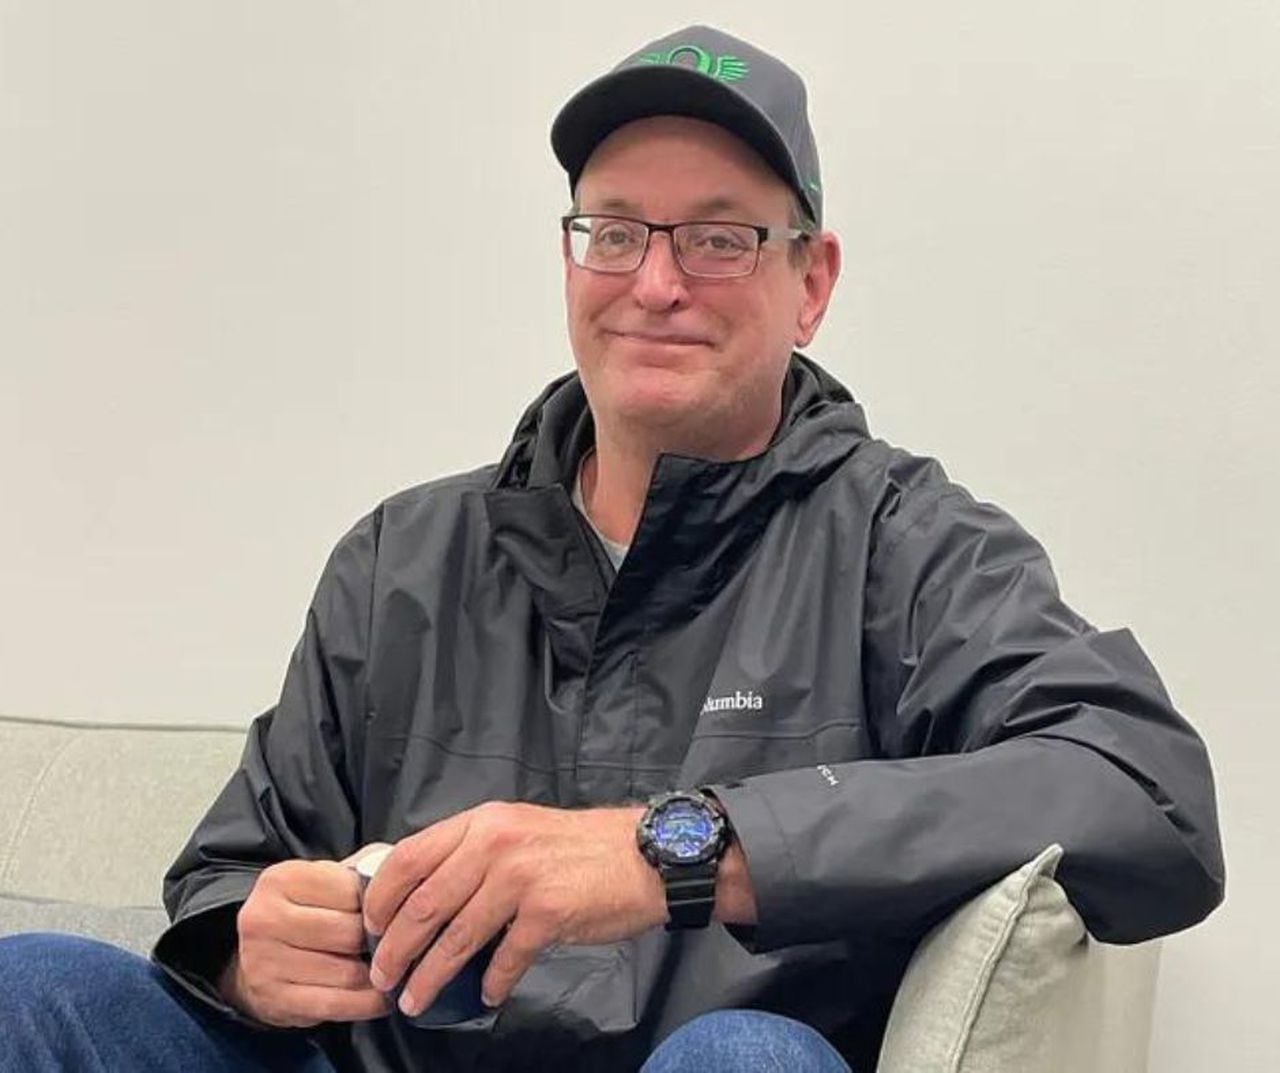 A man in his 50s holds a mug and smiles at the camera. He's sitting down on a white couch against a white wall, wearing glasses, a black baseball cap with a green logo, black jacket and jeans.